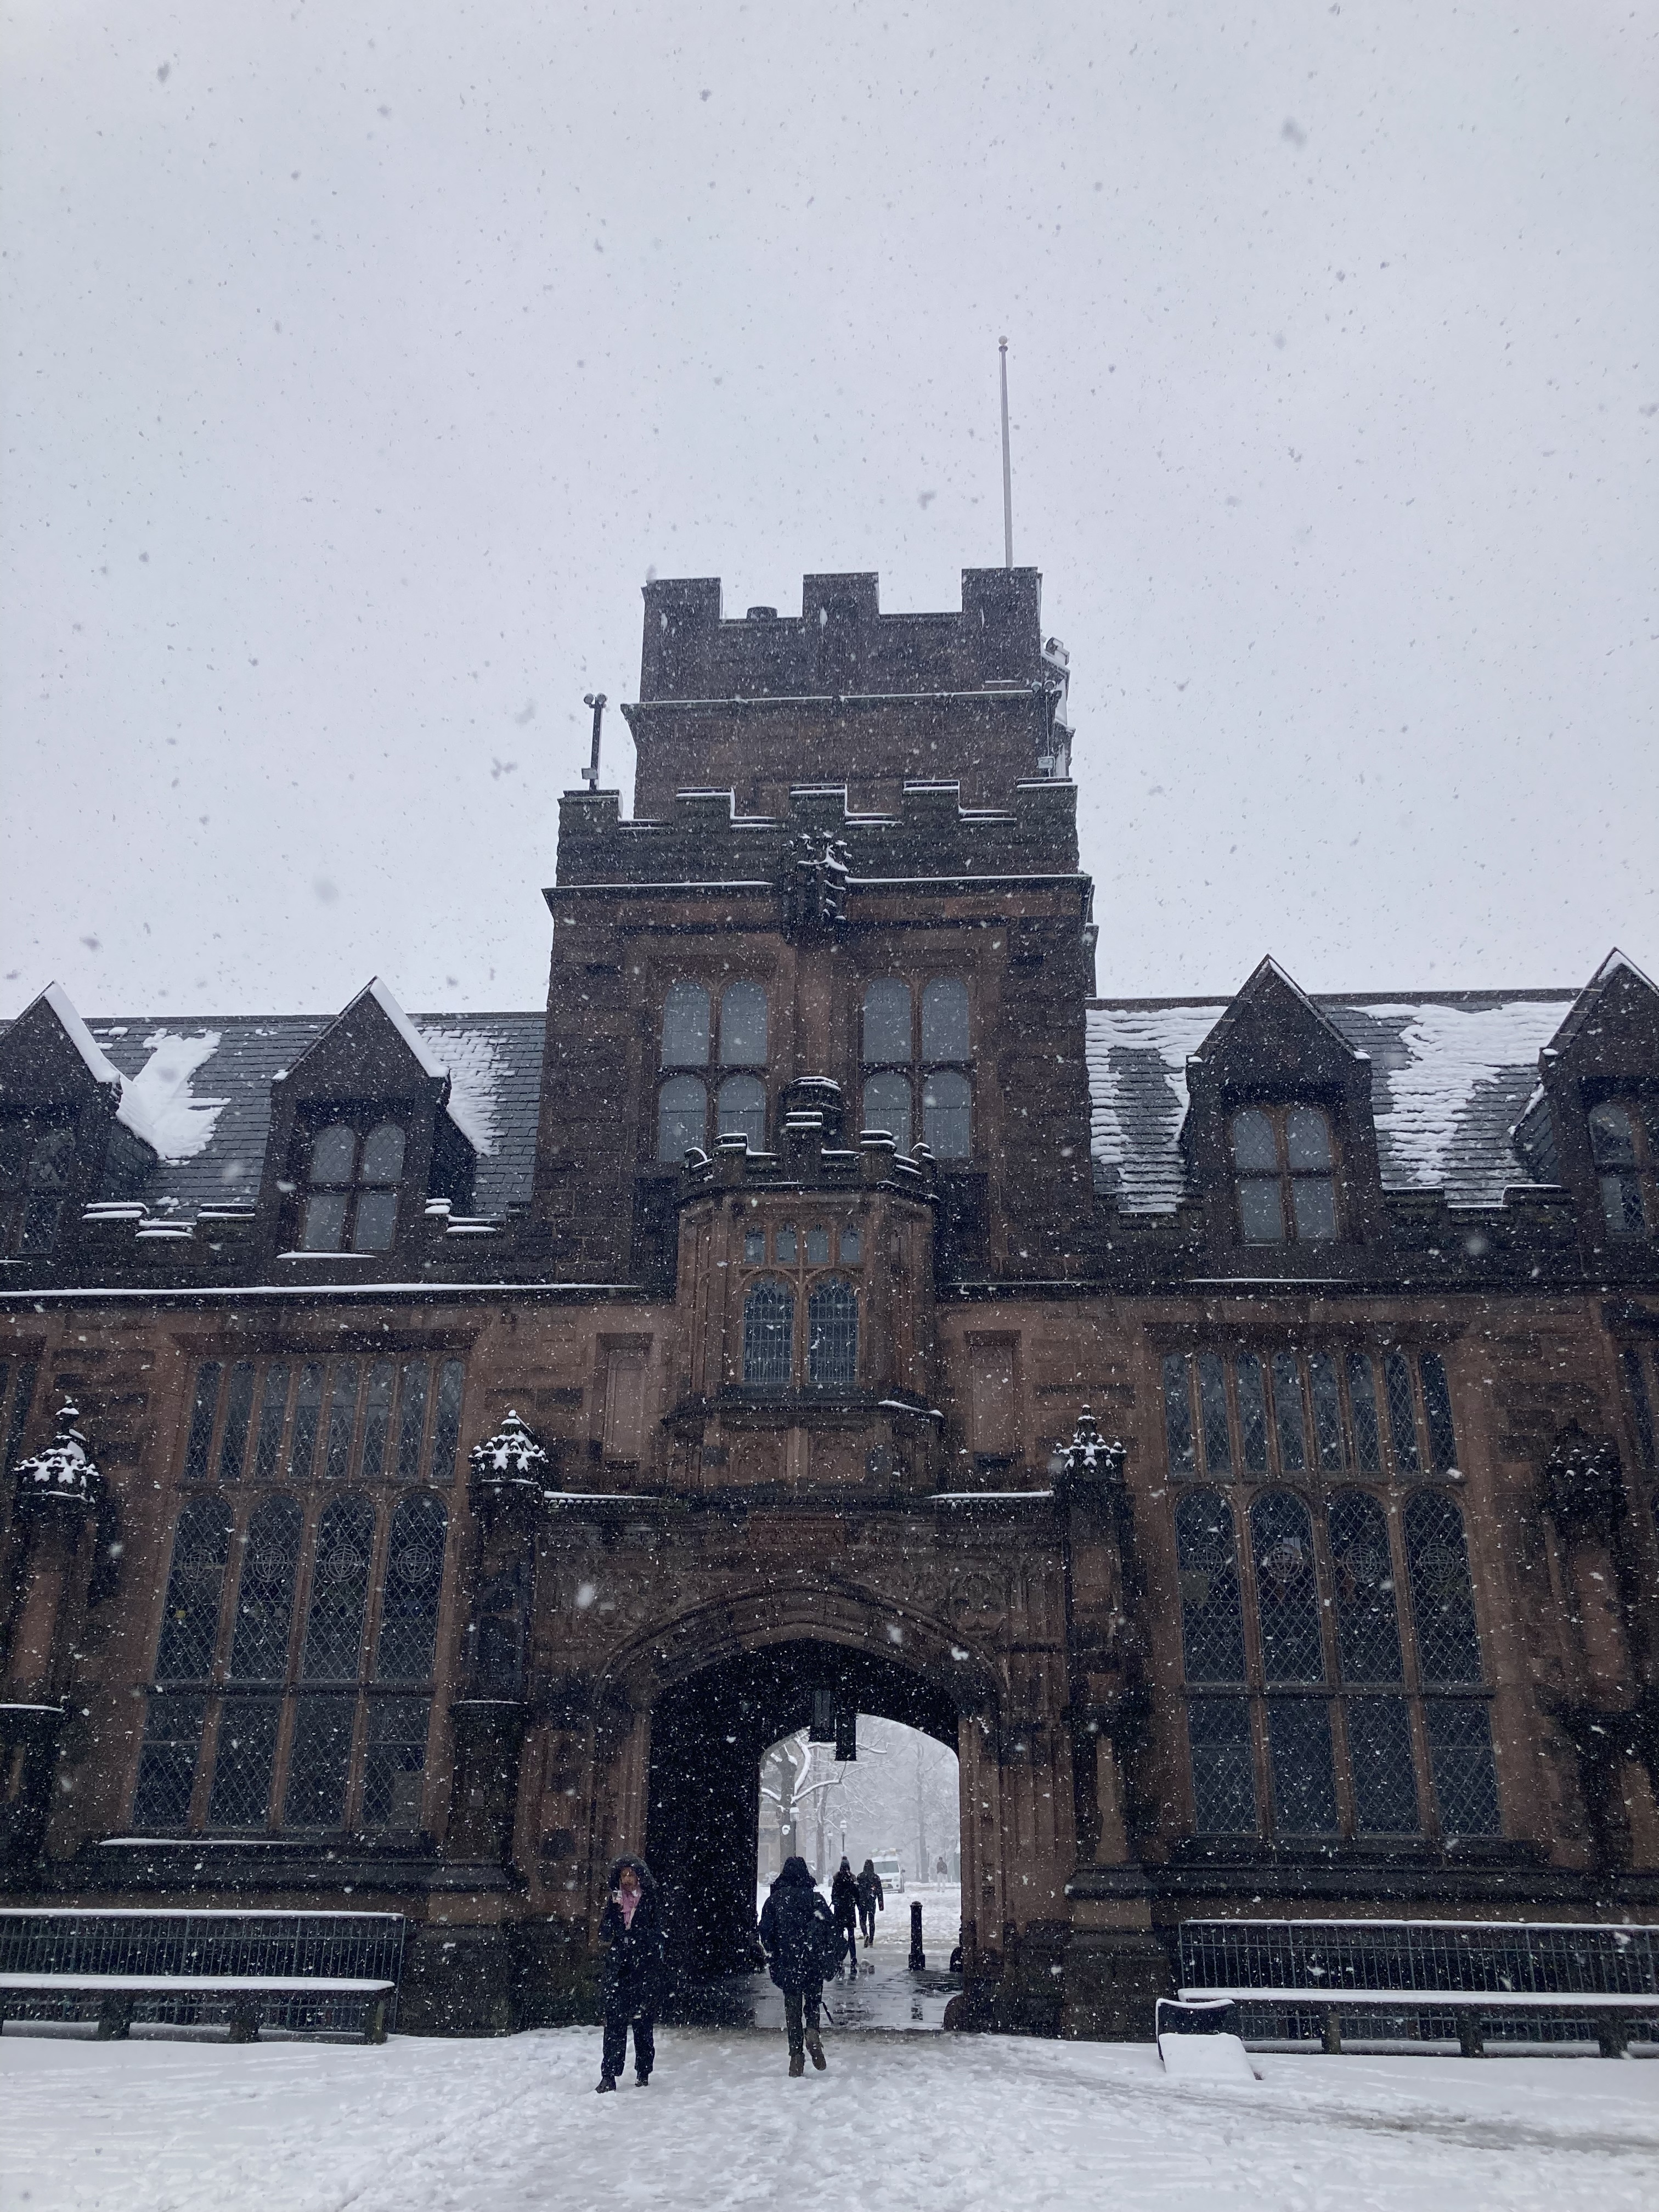 Gray skies and snow covered ground surrounding East Pyne Hall. Large snow flakes are falling.